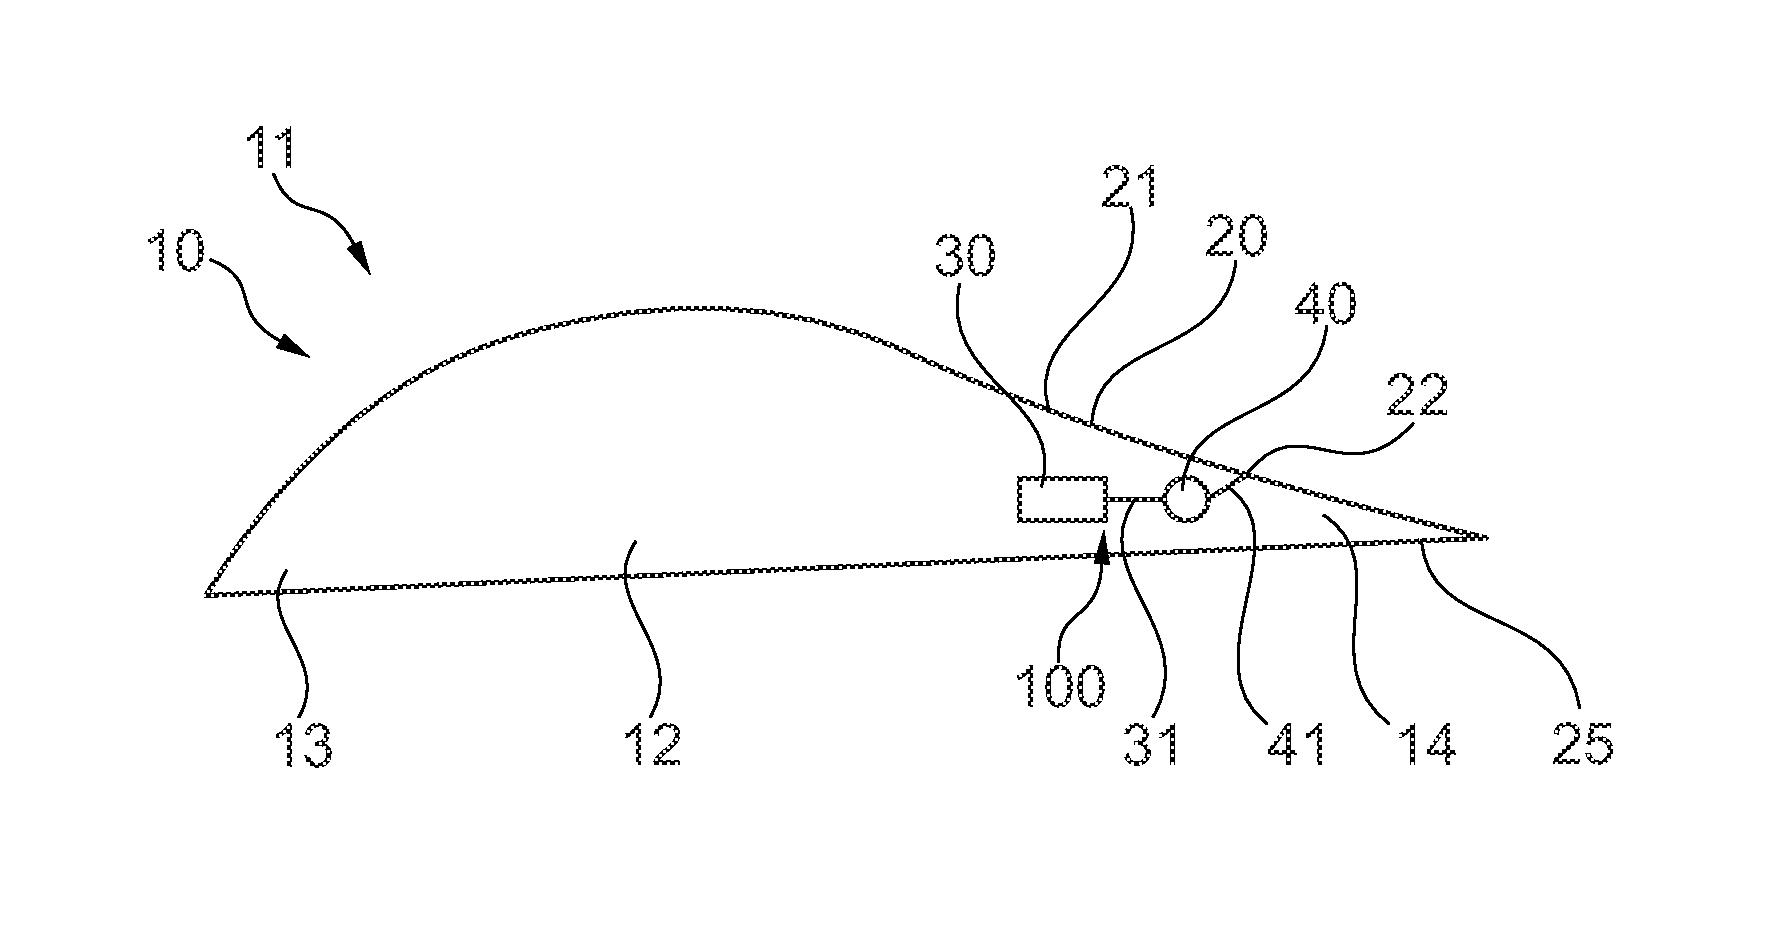 Morphing trailing edge device for an airfoil